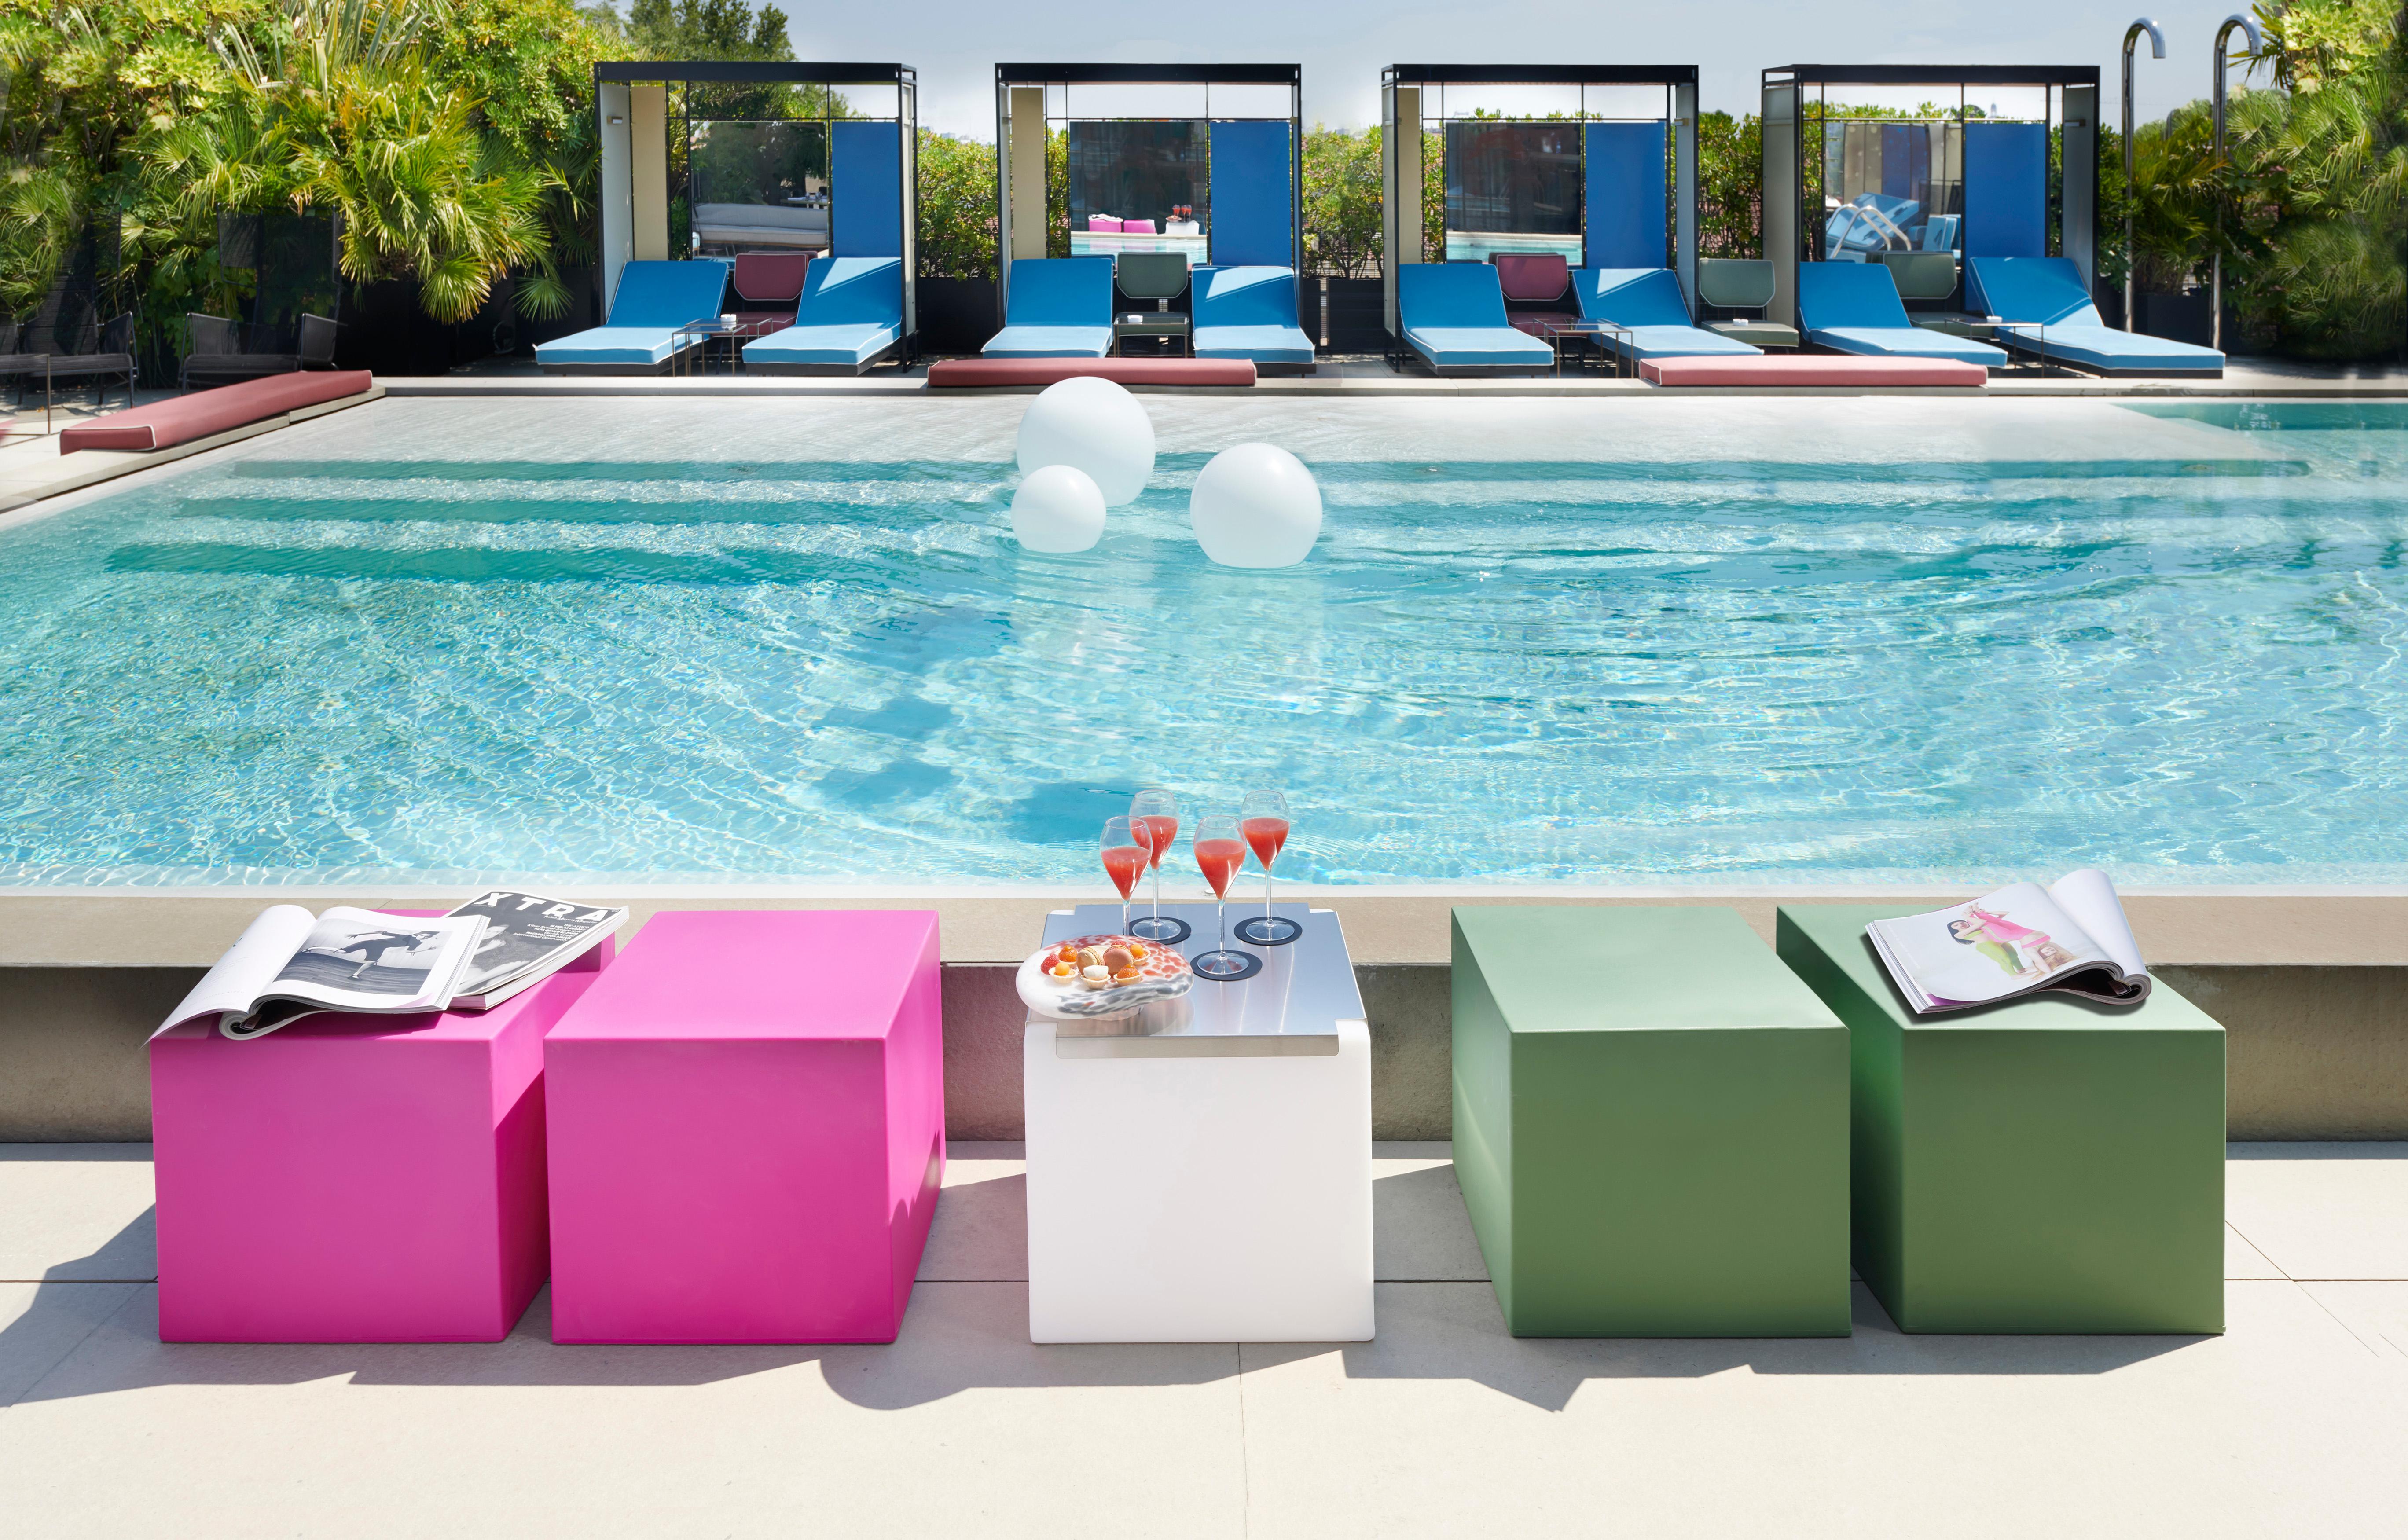 Milky White Cubo Pouf Stool by SLIDE Studio
Dimensions: D 43 x W 43 x H 43 cm. 
Materials: Polyethylene.
Weight: 4 kg.

Available in different color options. This product is suitable for indoor and outdoor use. Available in different versions: